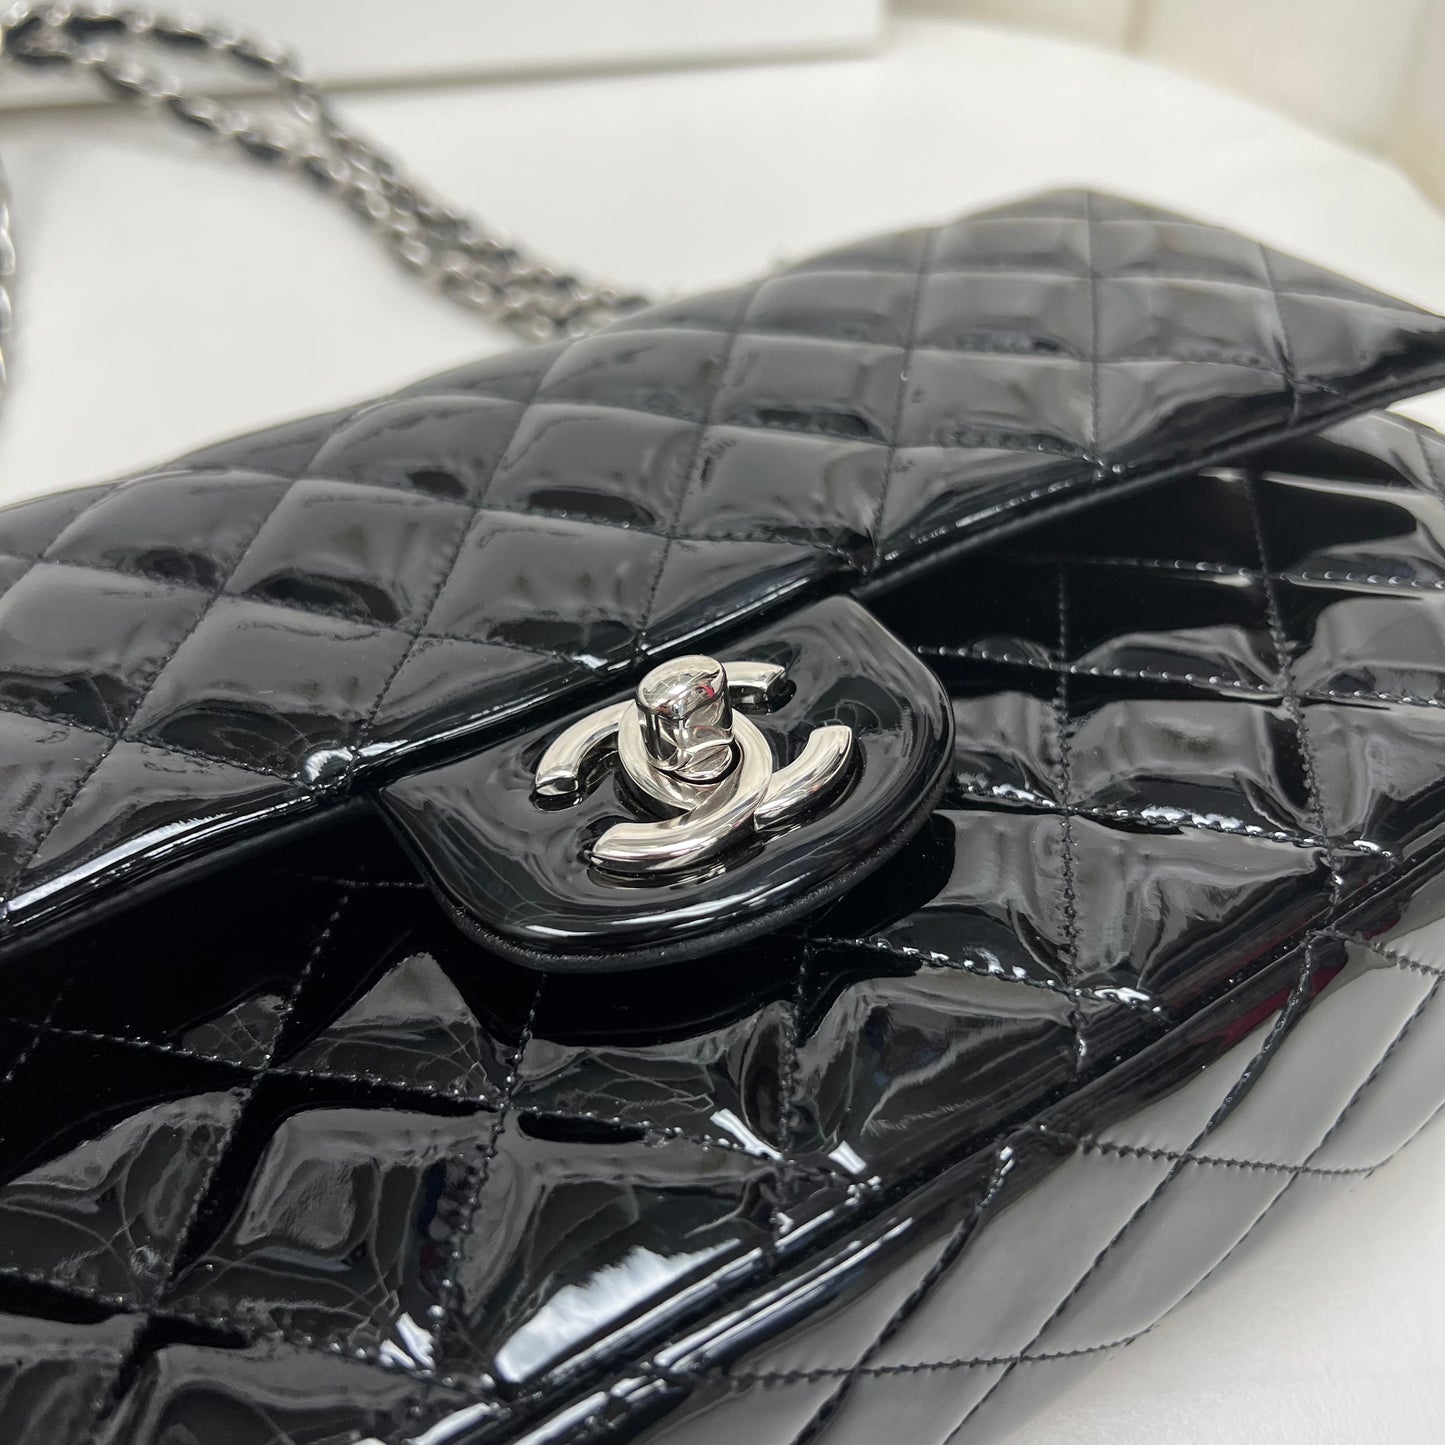 Chanel Medium Double Flap Patent Leather